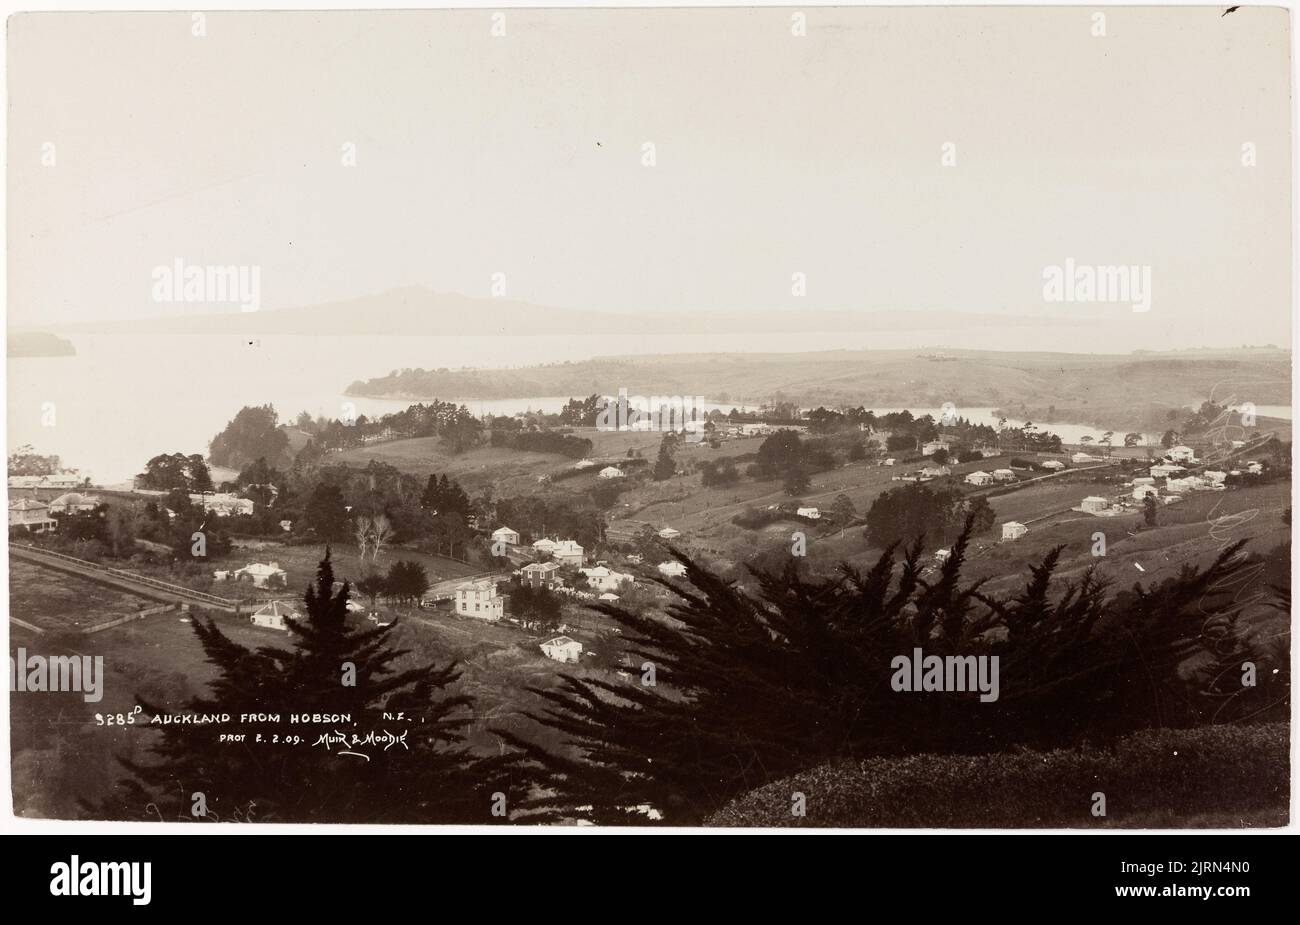 Auckland from Hobson, circa 1909, Auckland, by Muir & Moodie. Stock Photo